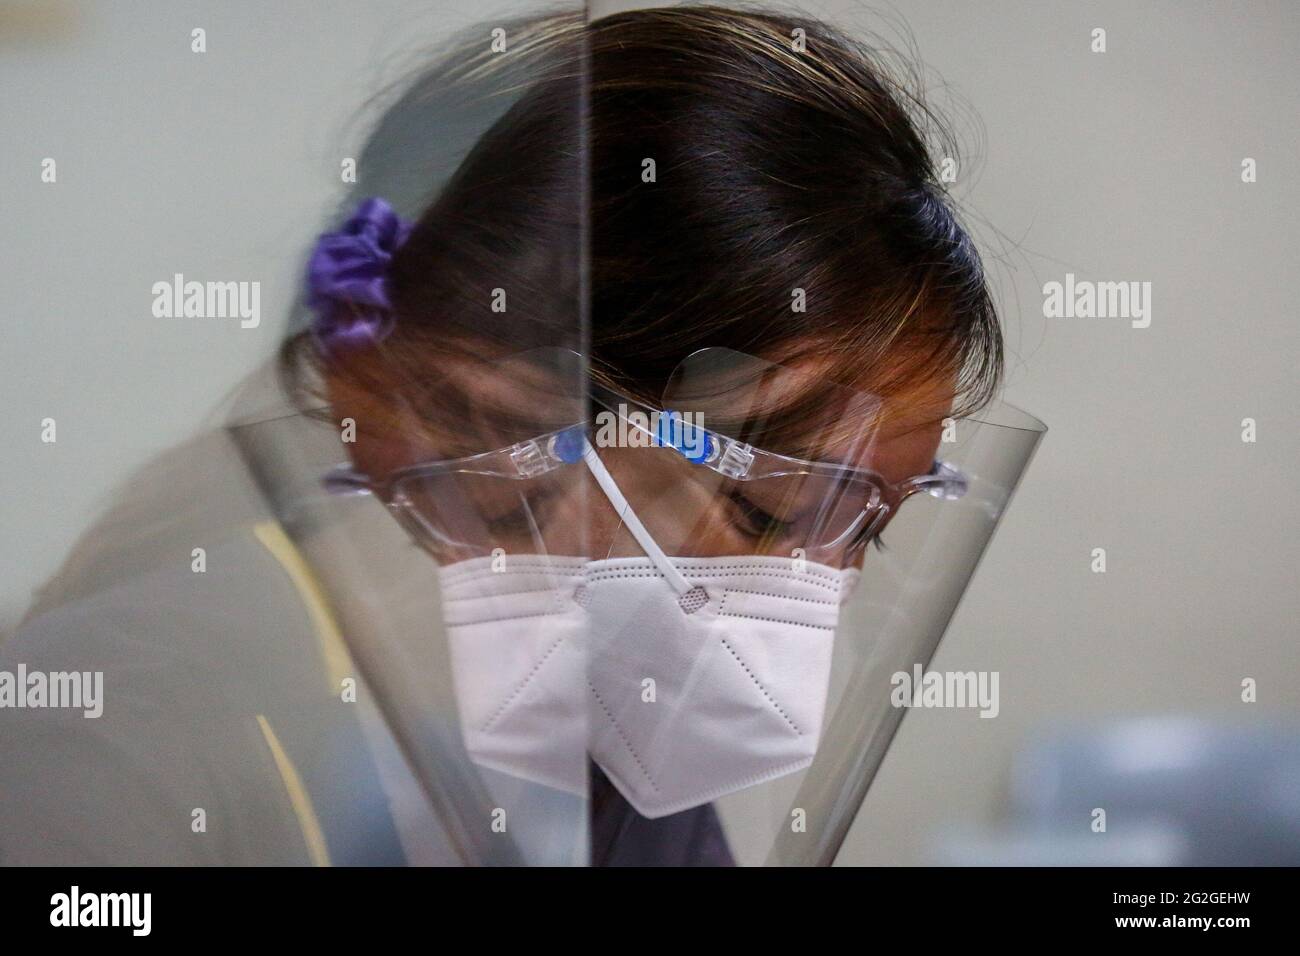 Manila, Philippines. June 10th 2021. A medical student is reflected on a plastic barrier during a face-to-face class at the University of Santo Tomas. The university started its limited face-to-face classes after the government allowed the resumption hands-on training and laboratory classes in campuses while observing health protocols to prevent the spread of the coronavirus disease. Stock Photo